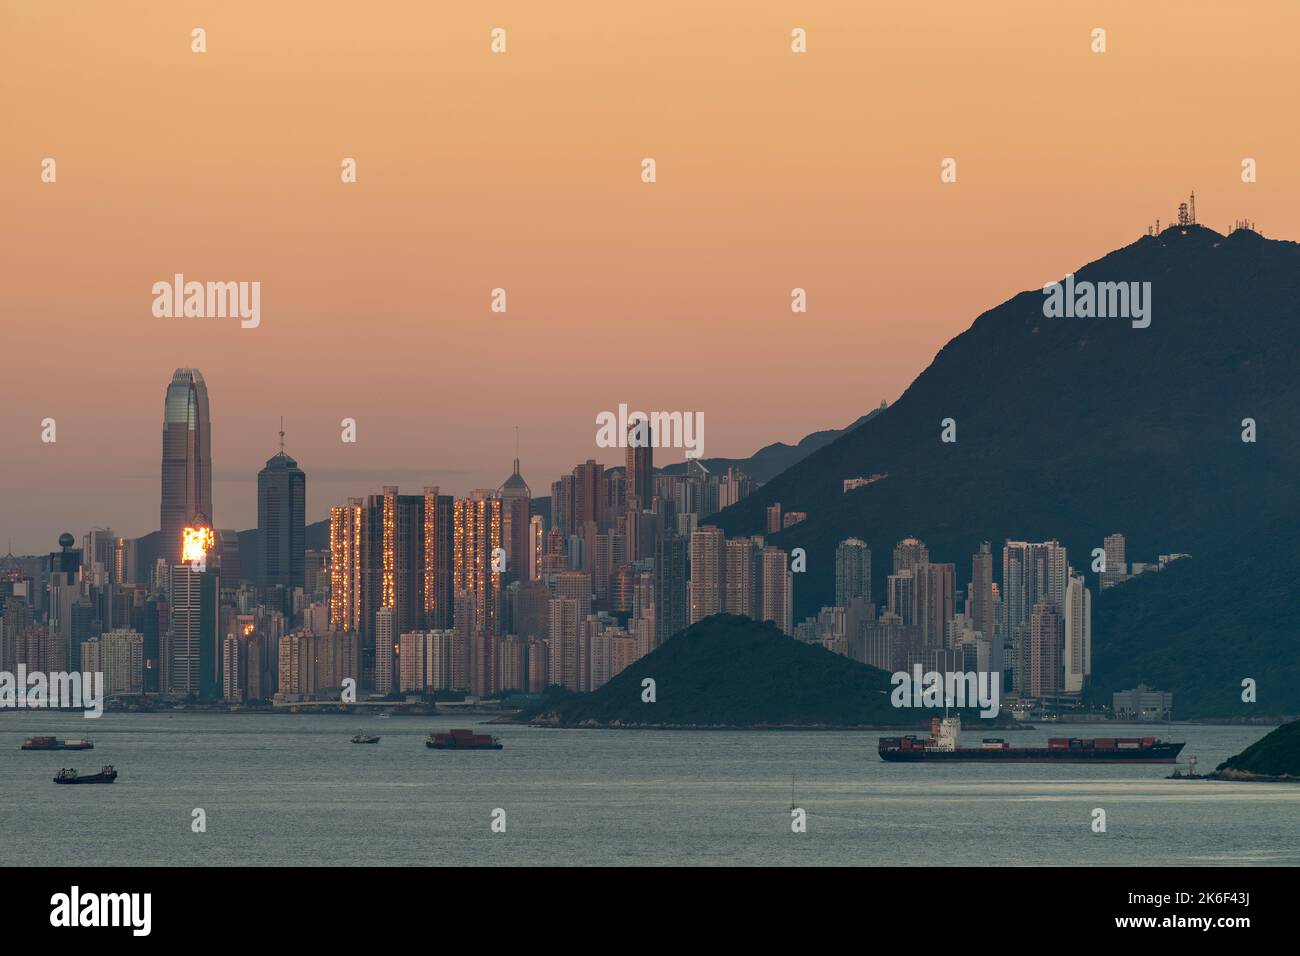 The setting sun is reflected in the high-rise buildings of Hong Kong Island, seen against the orange sky of the Belt of Venus phenomenon Stock Photo